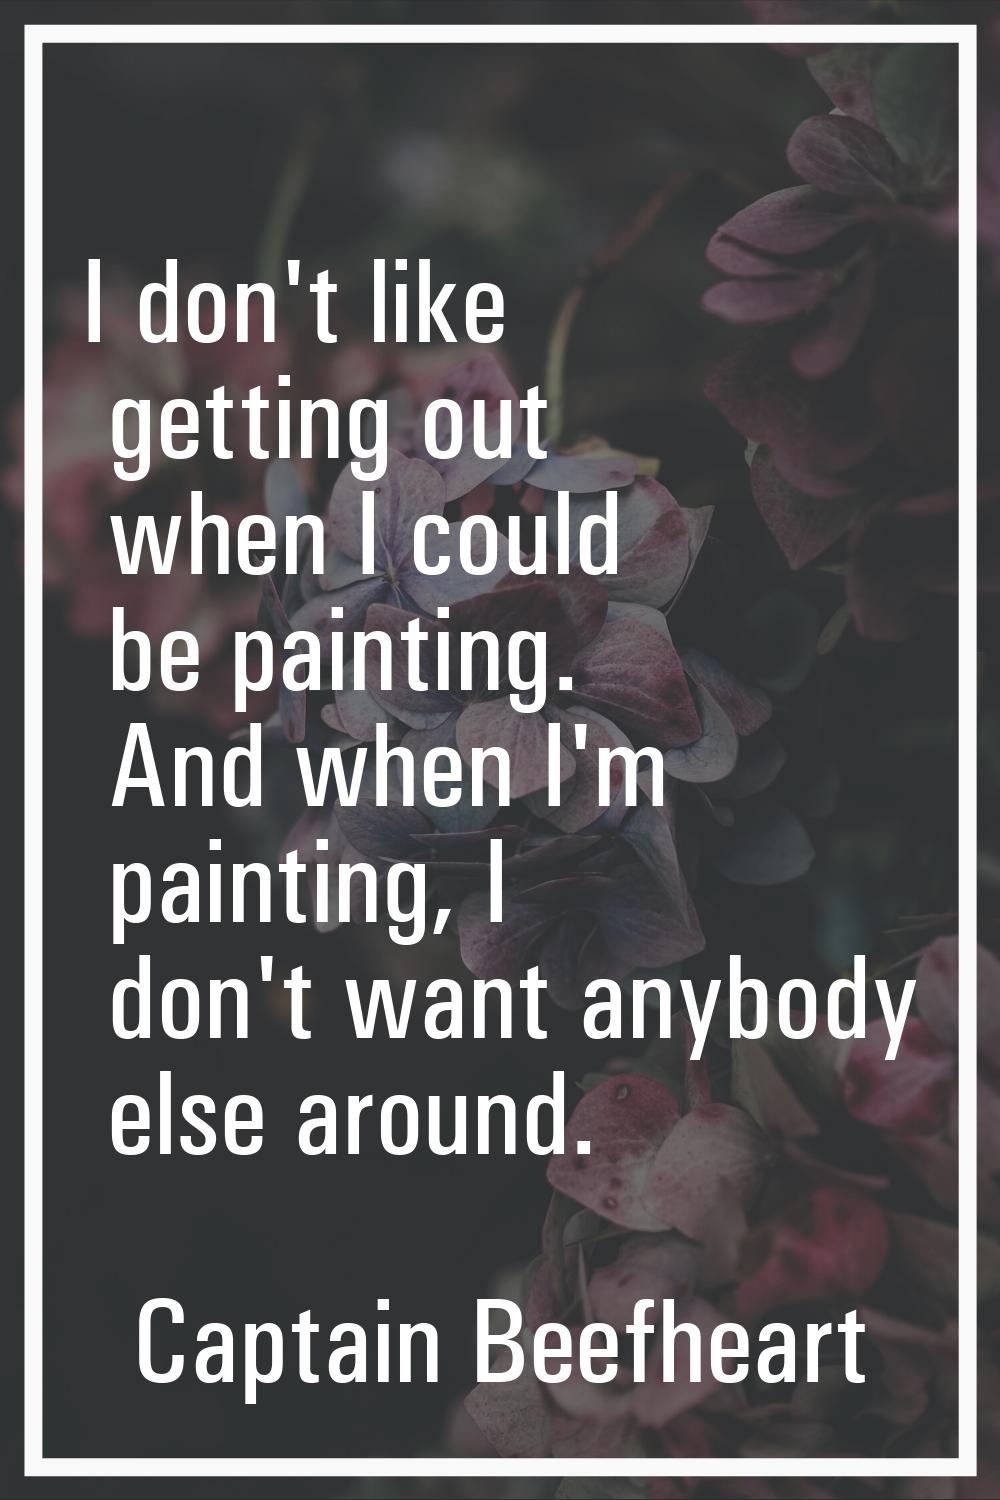 I don't like getting out when I could be painting. And when I'm painting, I don't want anybody else